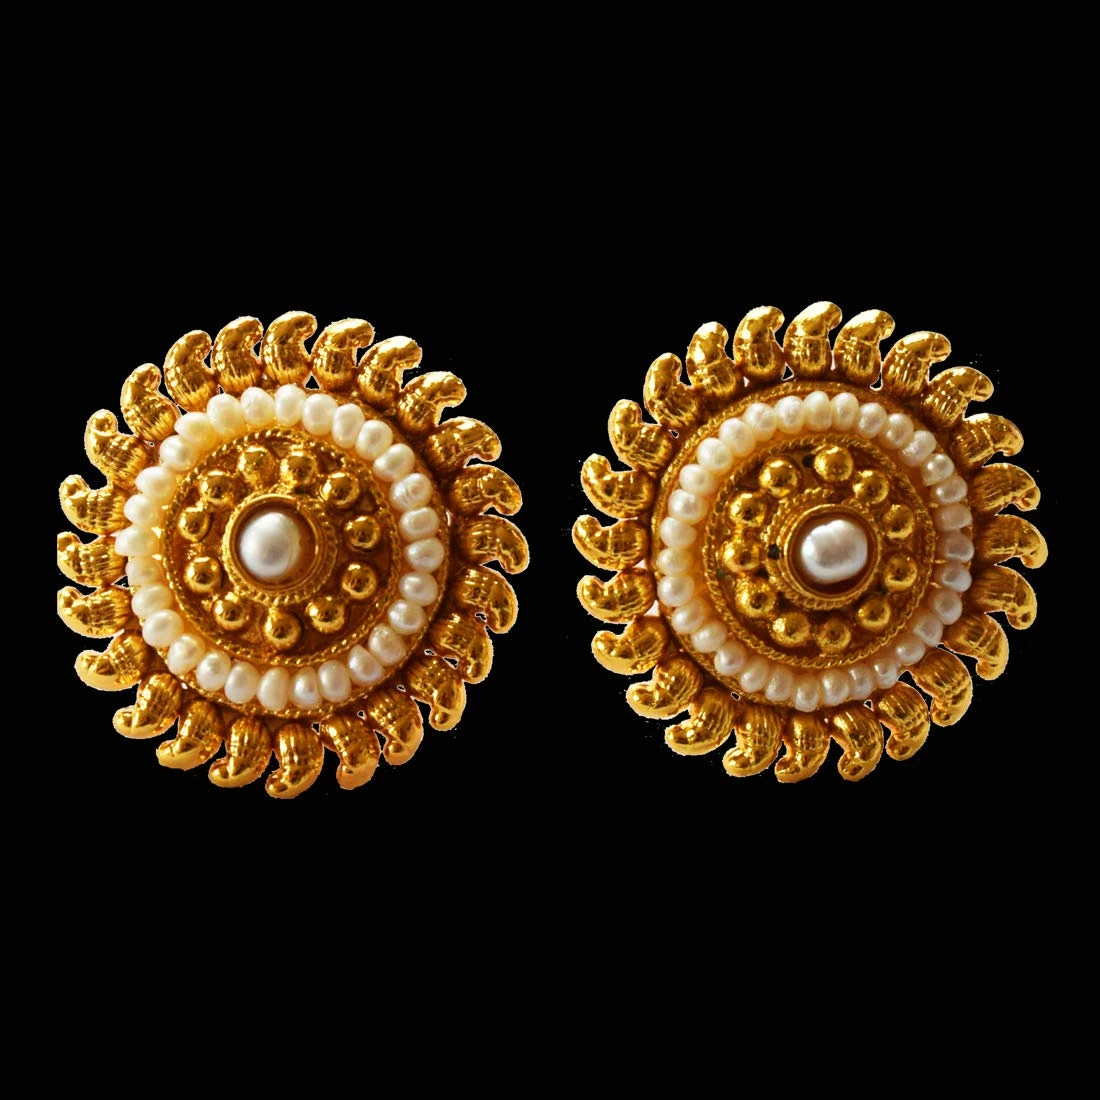 Temple Shape Round Gold Plated Metal Freshwater Pearl Earrings (SP126ER)